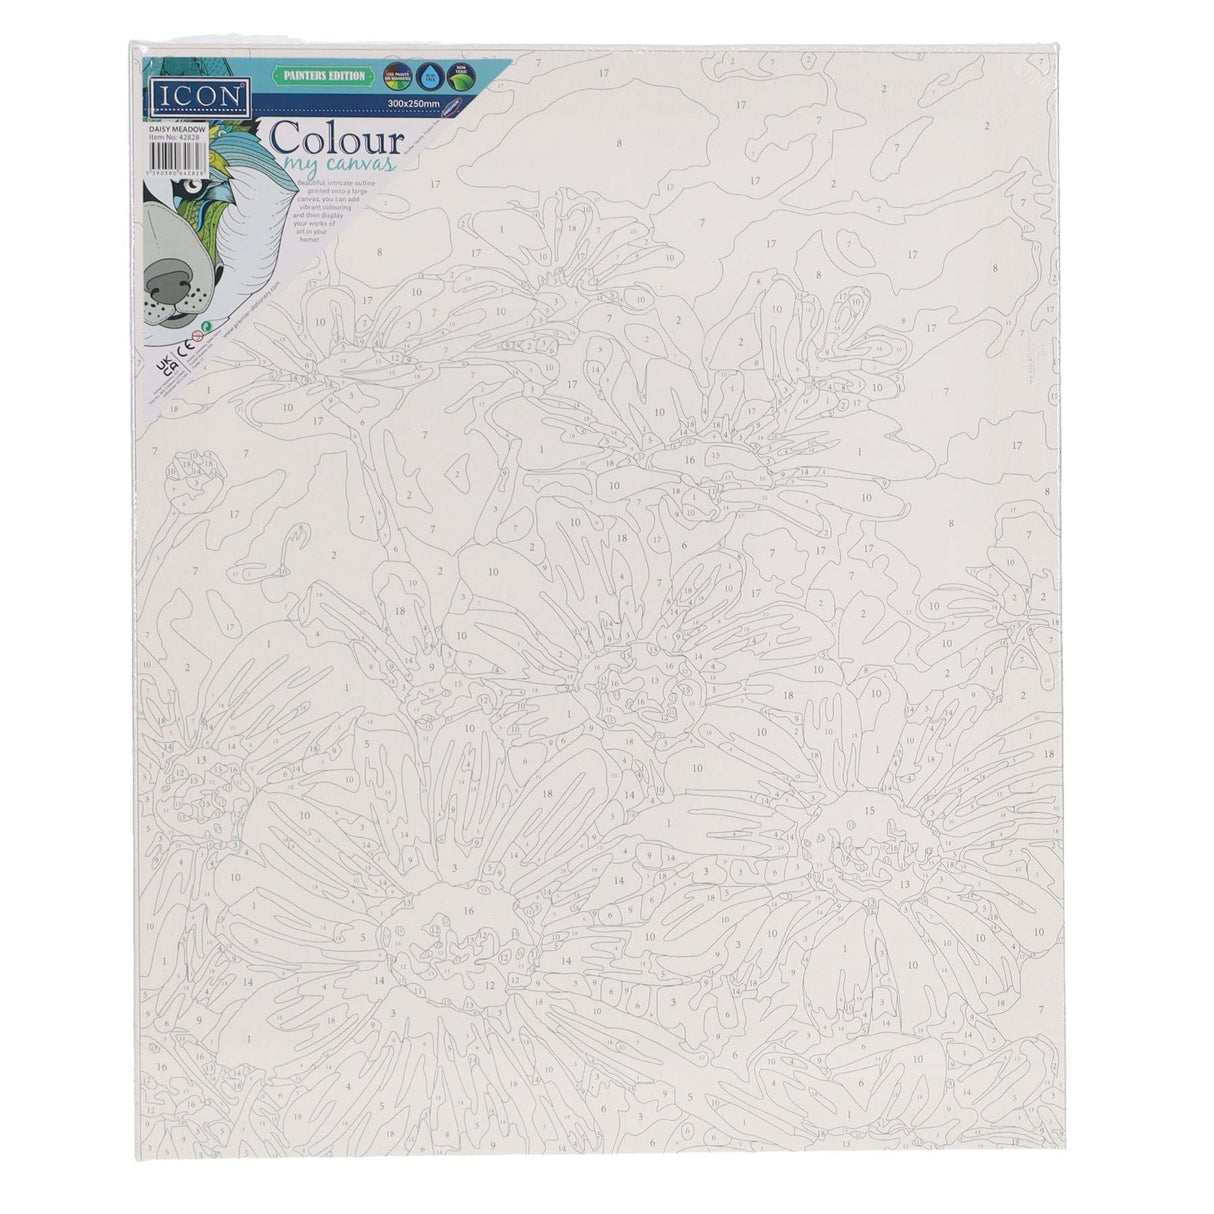 Icon Paint By Numbers Canvas - 300x250mm - Daisy Meadow | Stationery Shop UK